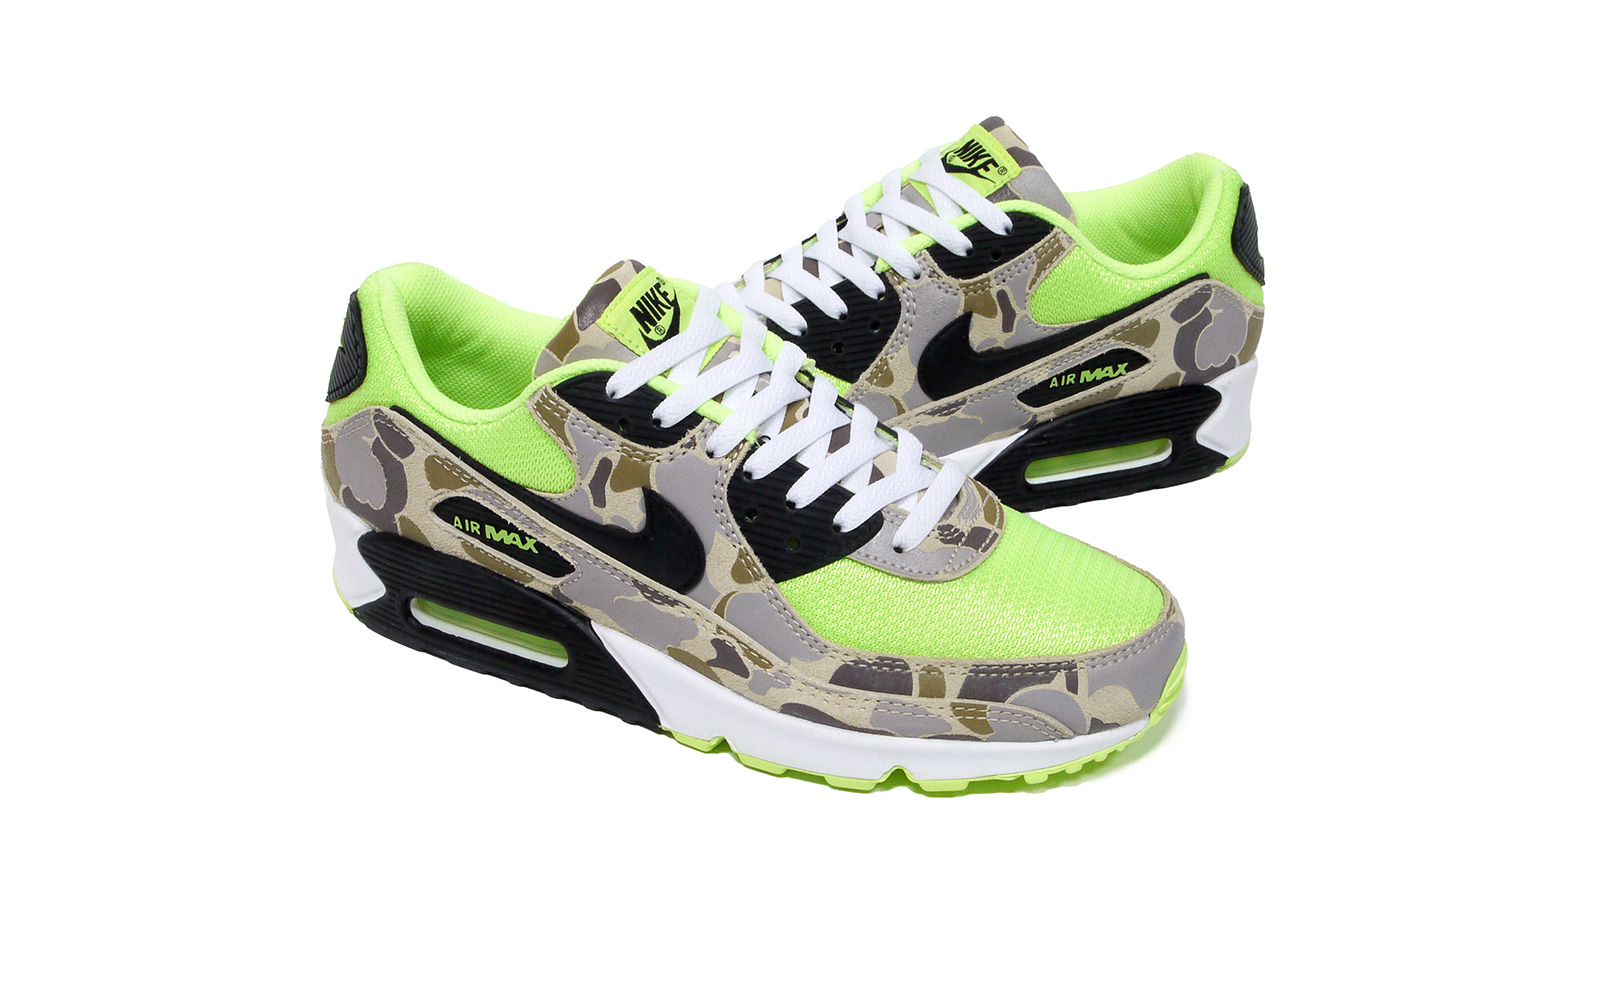 NIKE AIR MAX 90 SP “DUCK CAMO” “30th ANNIVERSARY” | 特集ページ Features